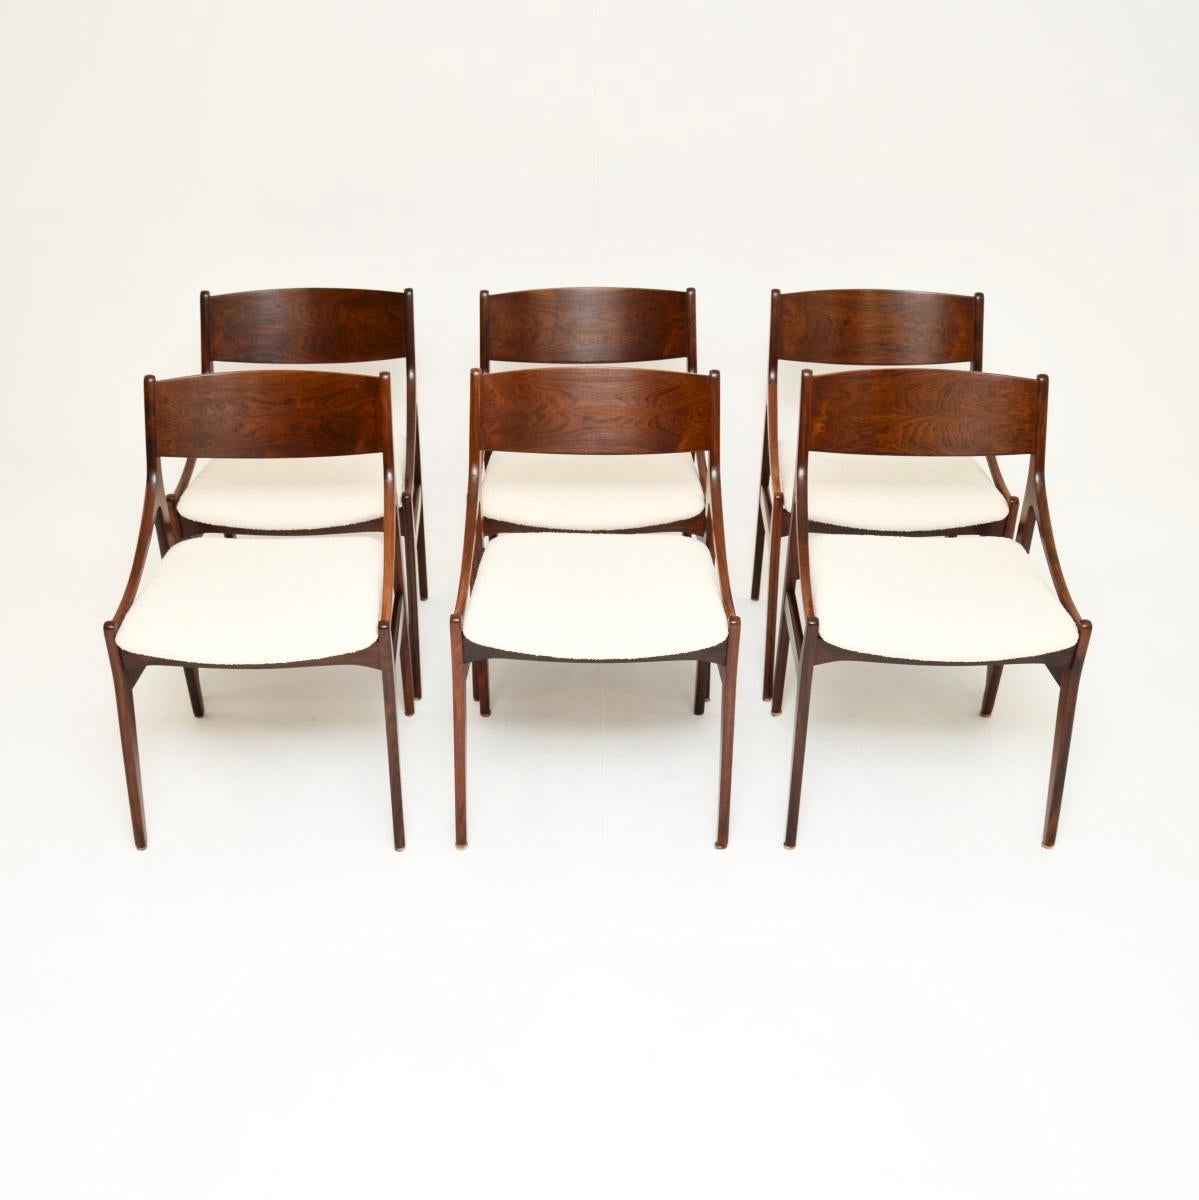 An absolutely stunning set of six Danish dining chairs by H. Vestervig Eriksen. They were manufactured in Denmark in the 1960’s by BRDR Tromborg.

The quality is outstanding and they have a gorgeous design, with sweeping curves and beautiful lines.